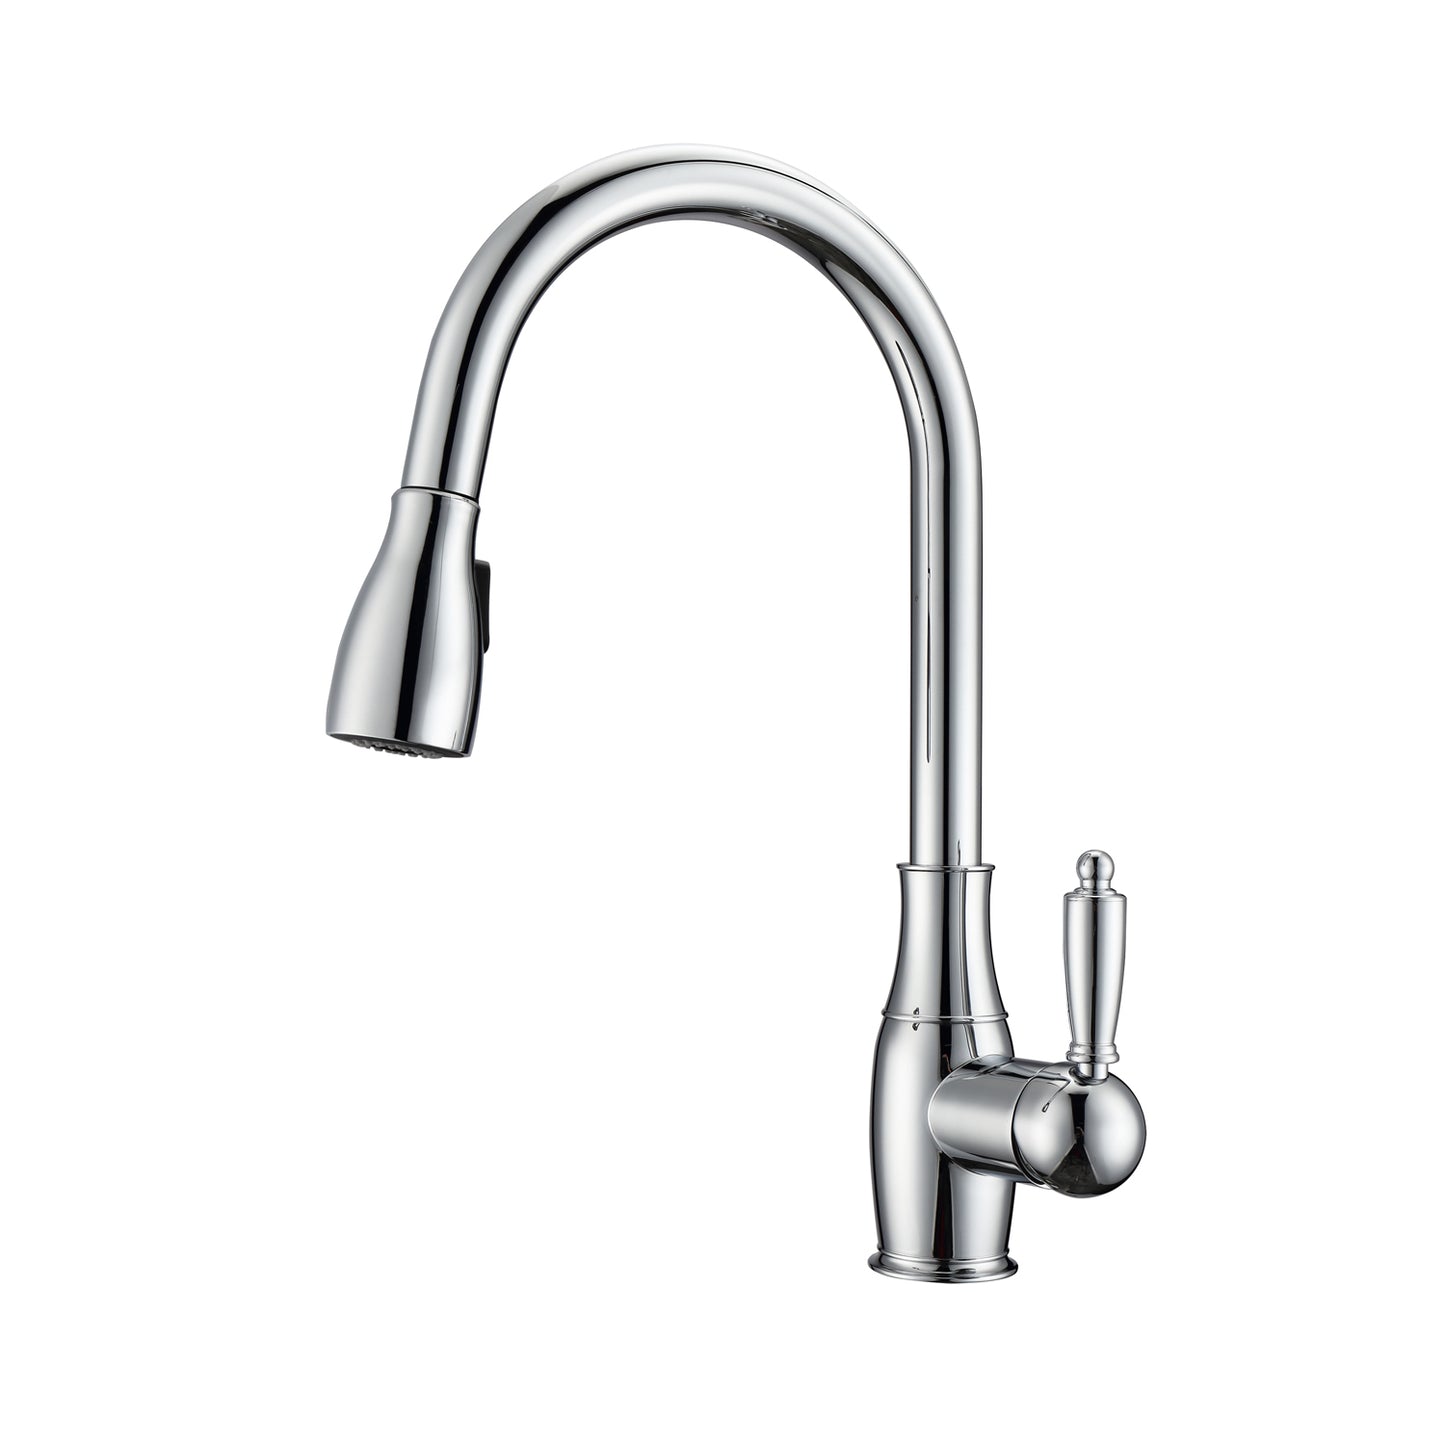 Cullen 2 Kitchen Faucet, Pull-Out Sprayer, Single Lever Handle, Chrome